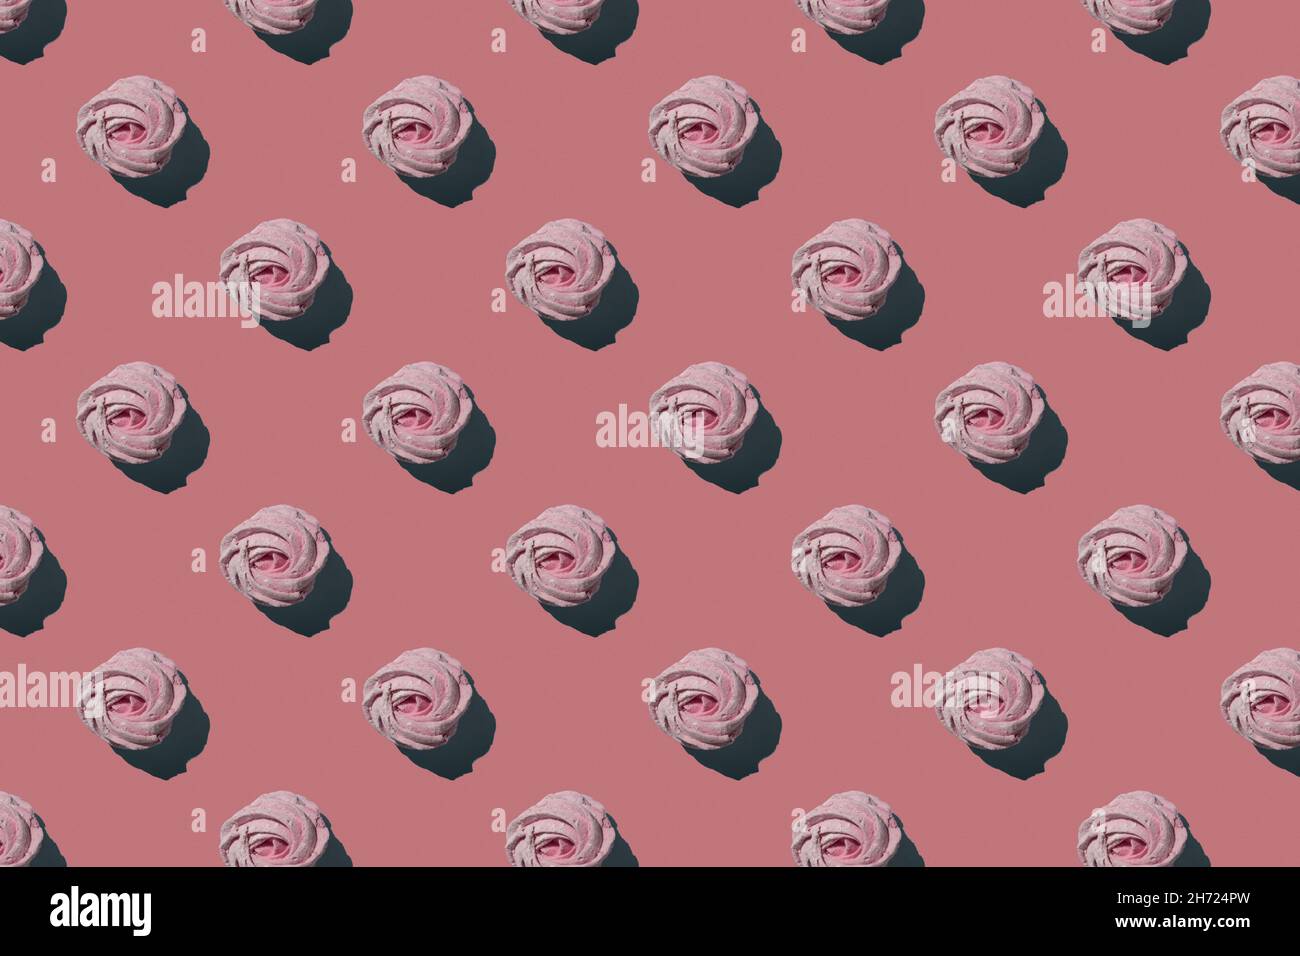 Zephyr on a pink background. Seamless Zephyr Pattern. Hard shadows Stock Photo